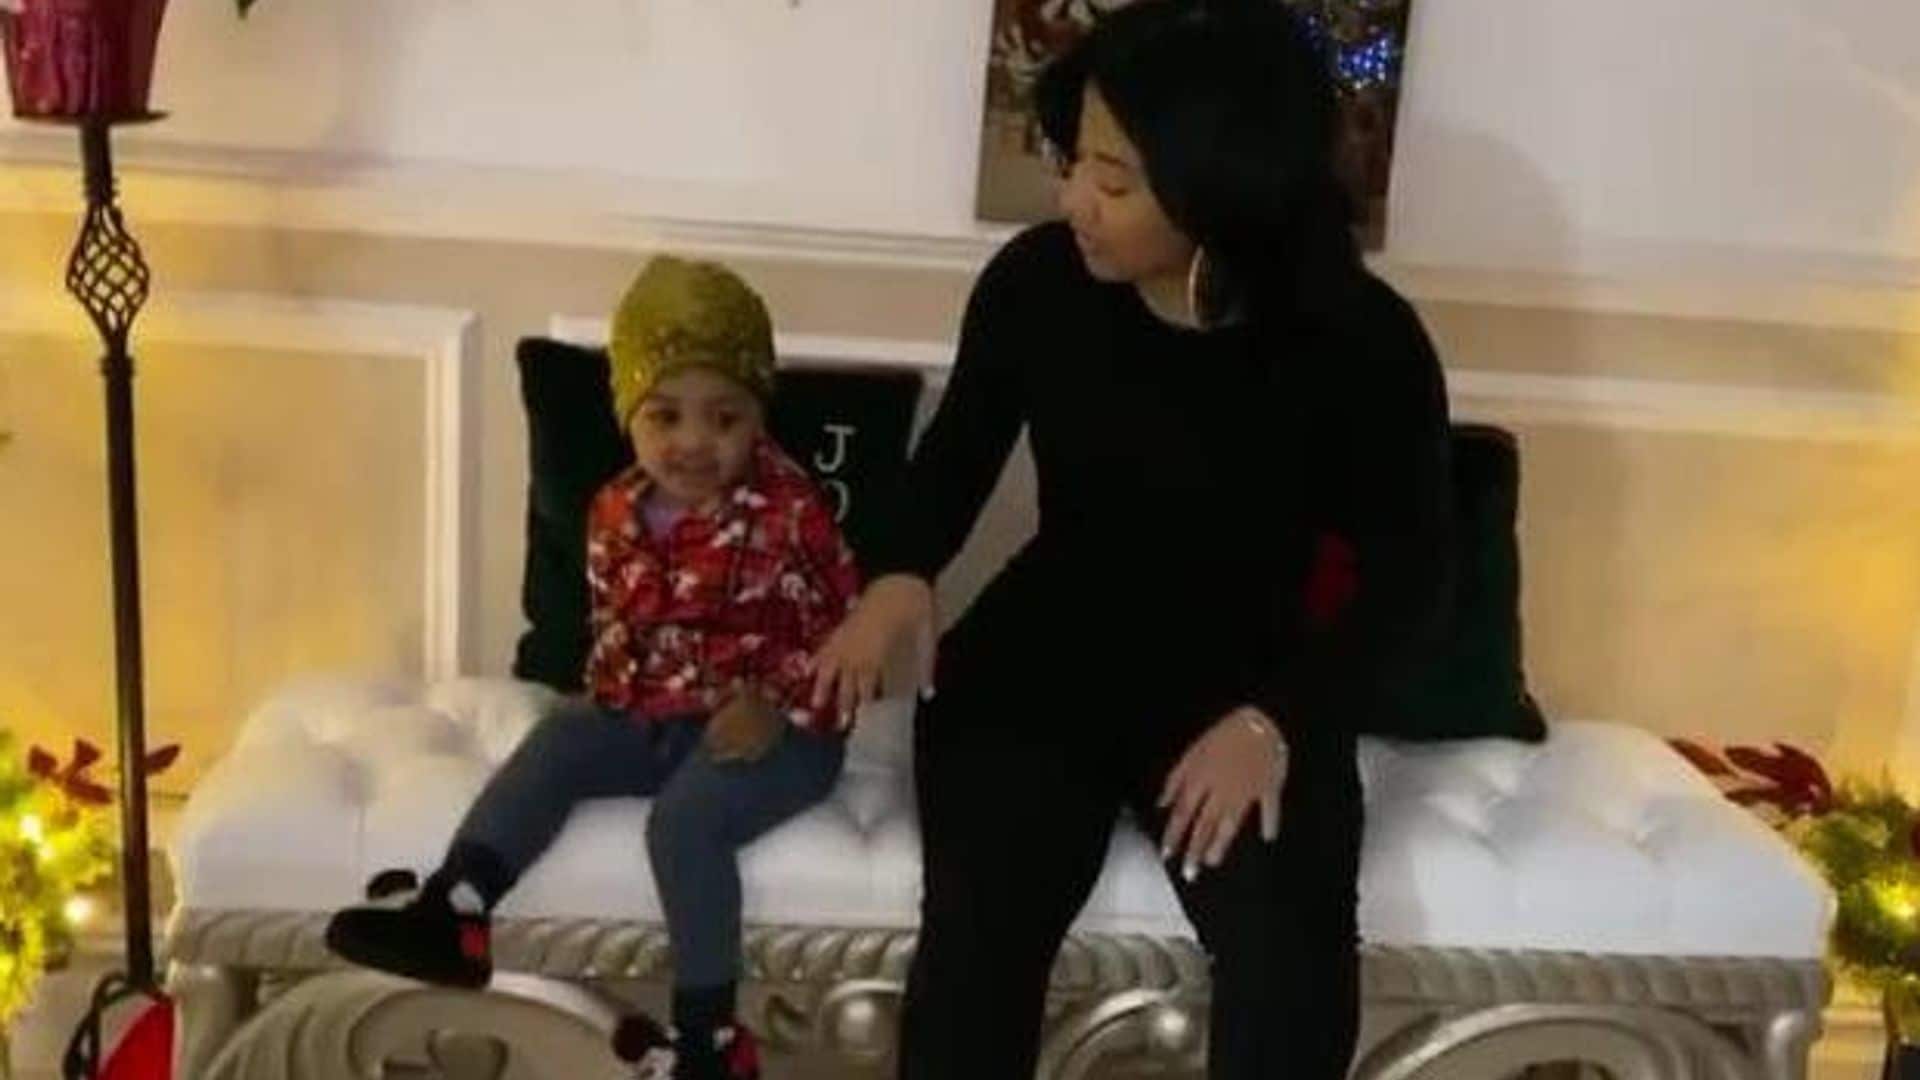 Cardi B's daughter Kulture shows off singing skills in adorable new video